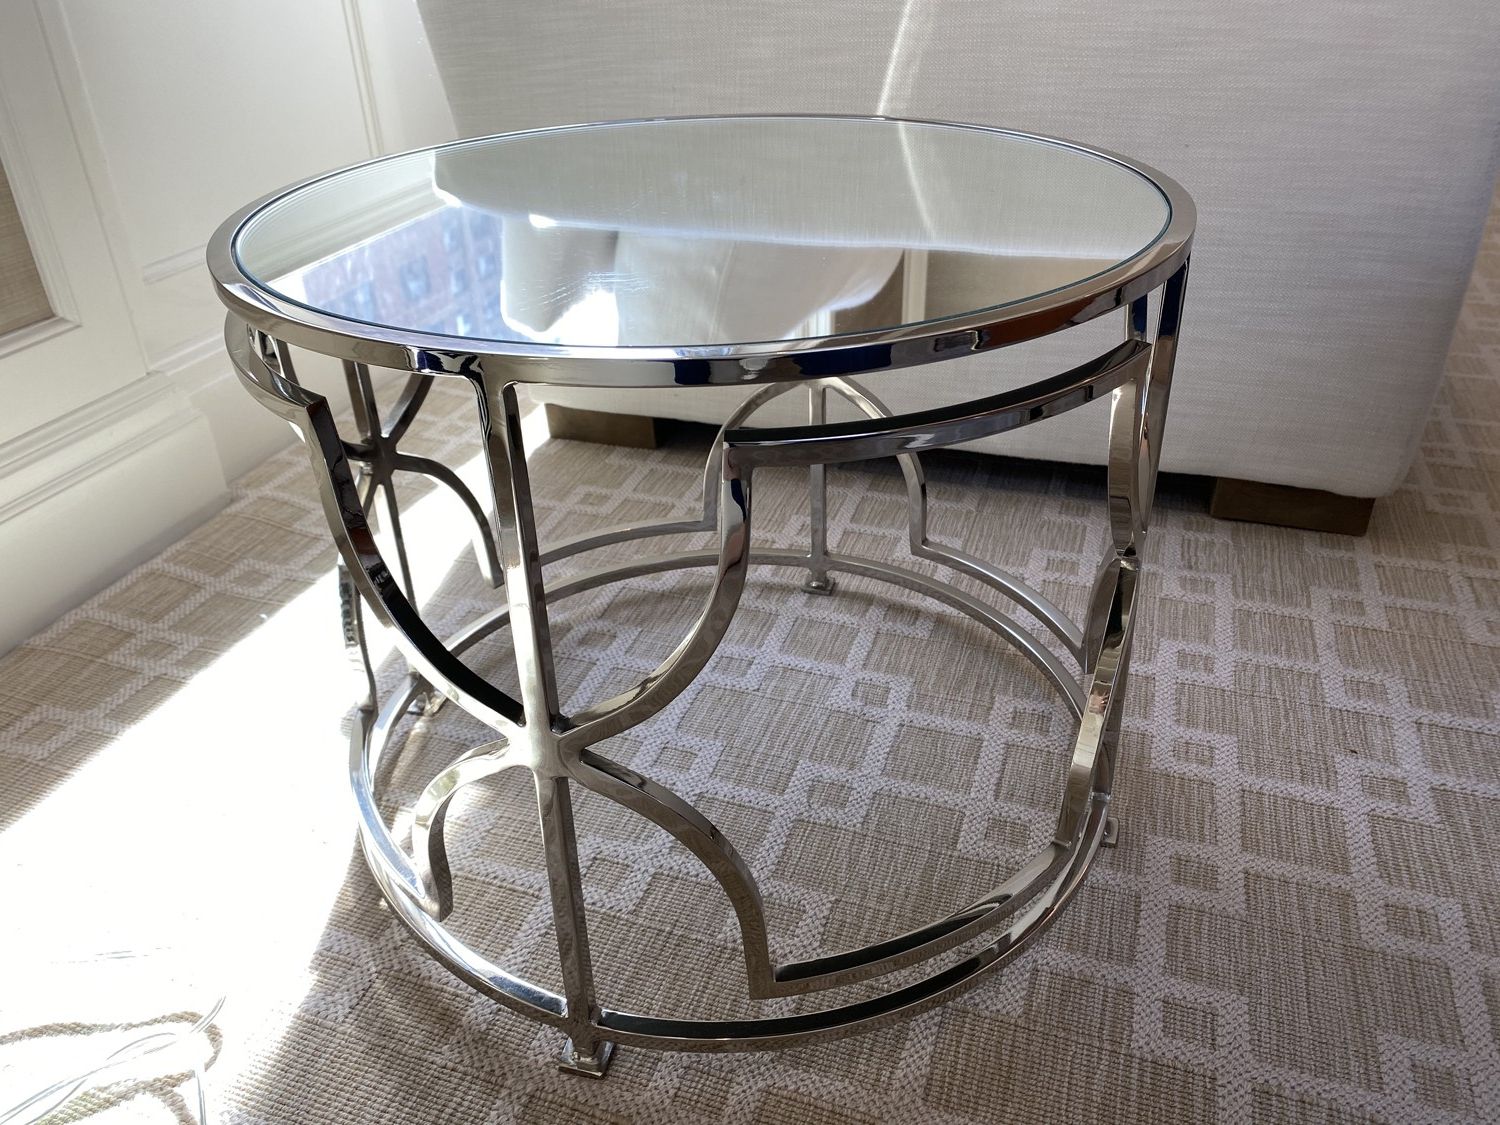 Polished Chrome Round Cocktail Tables Intended For Recent Worlds Away Round Polished Chrome Side Table With Mirrored Top • The (View 1 of 10)